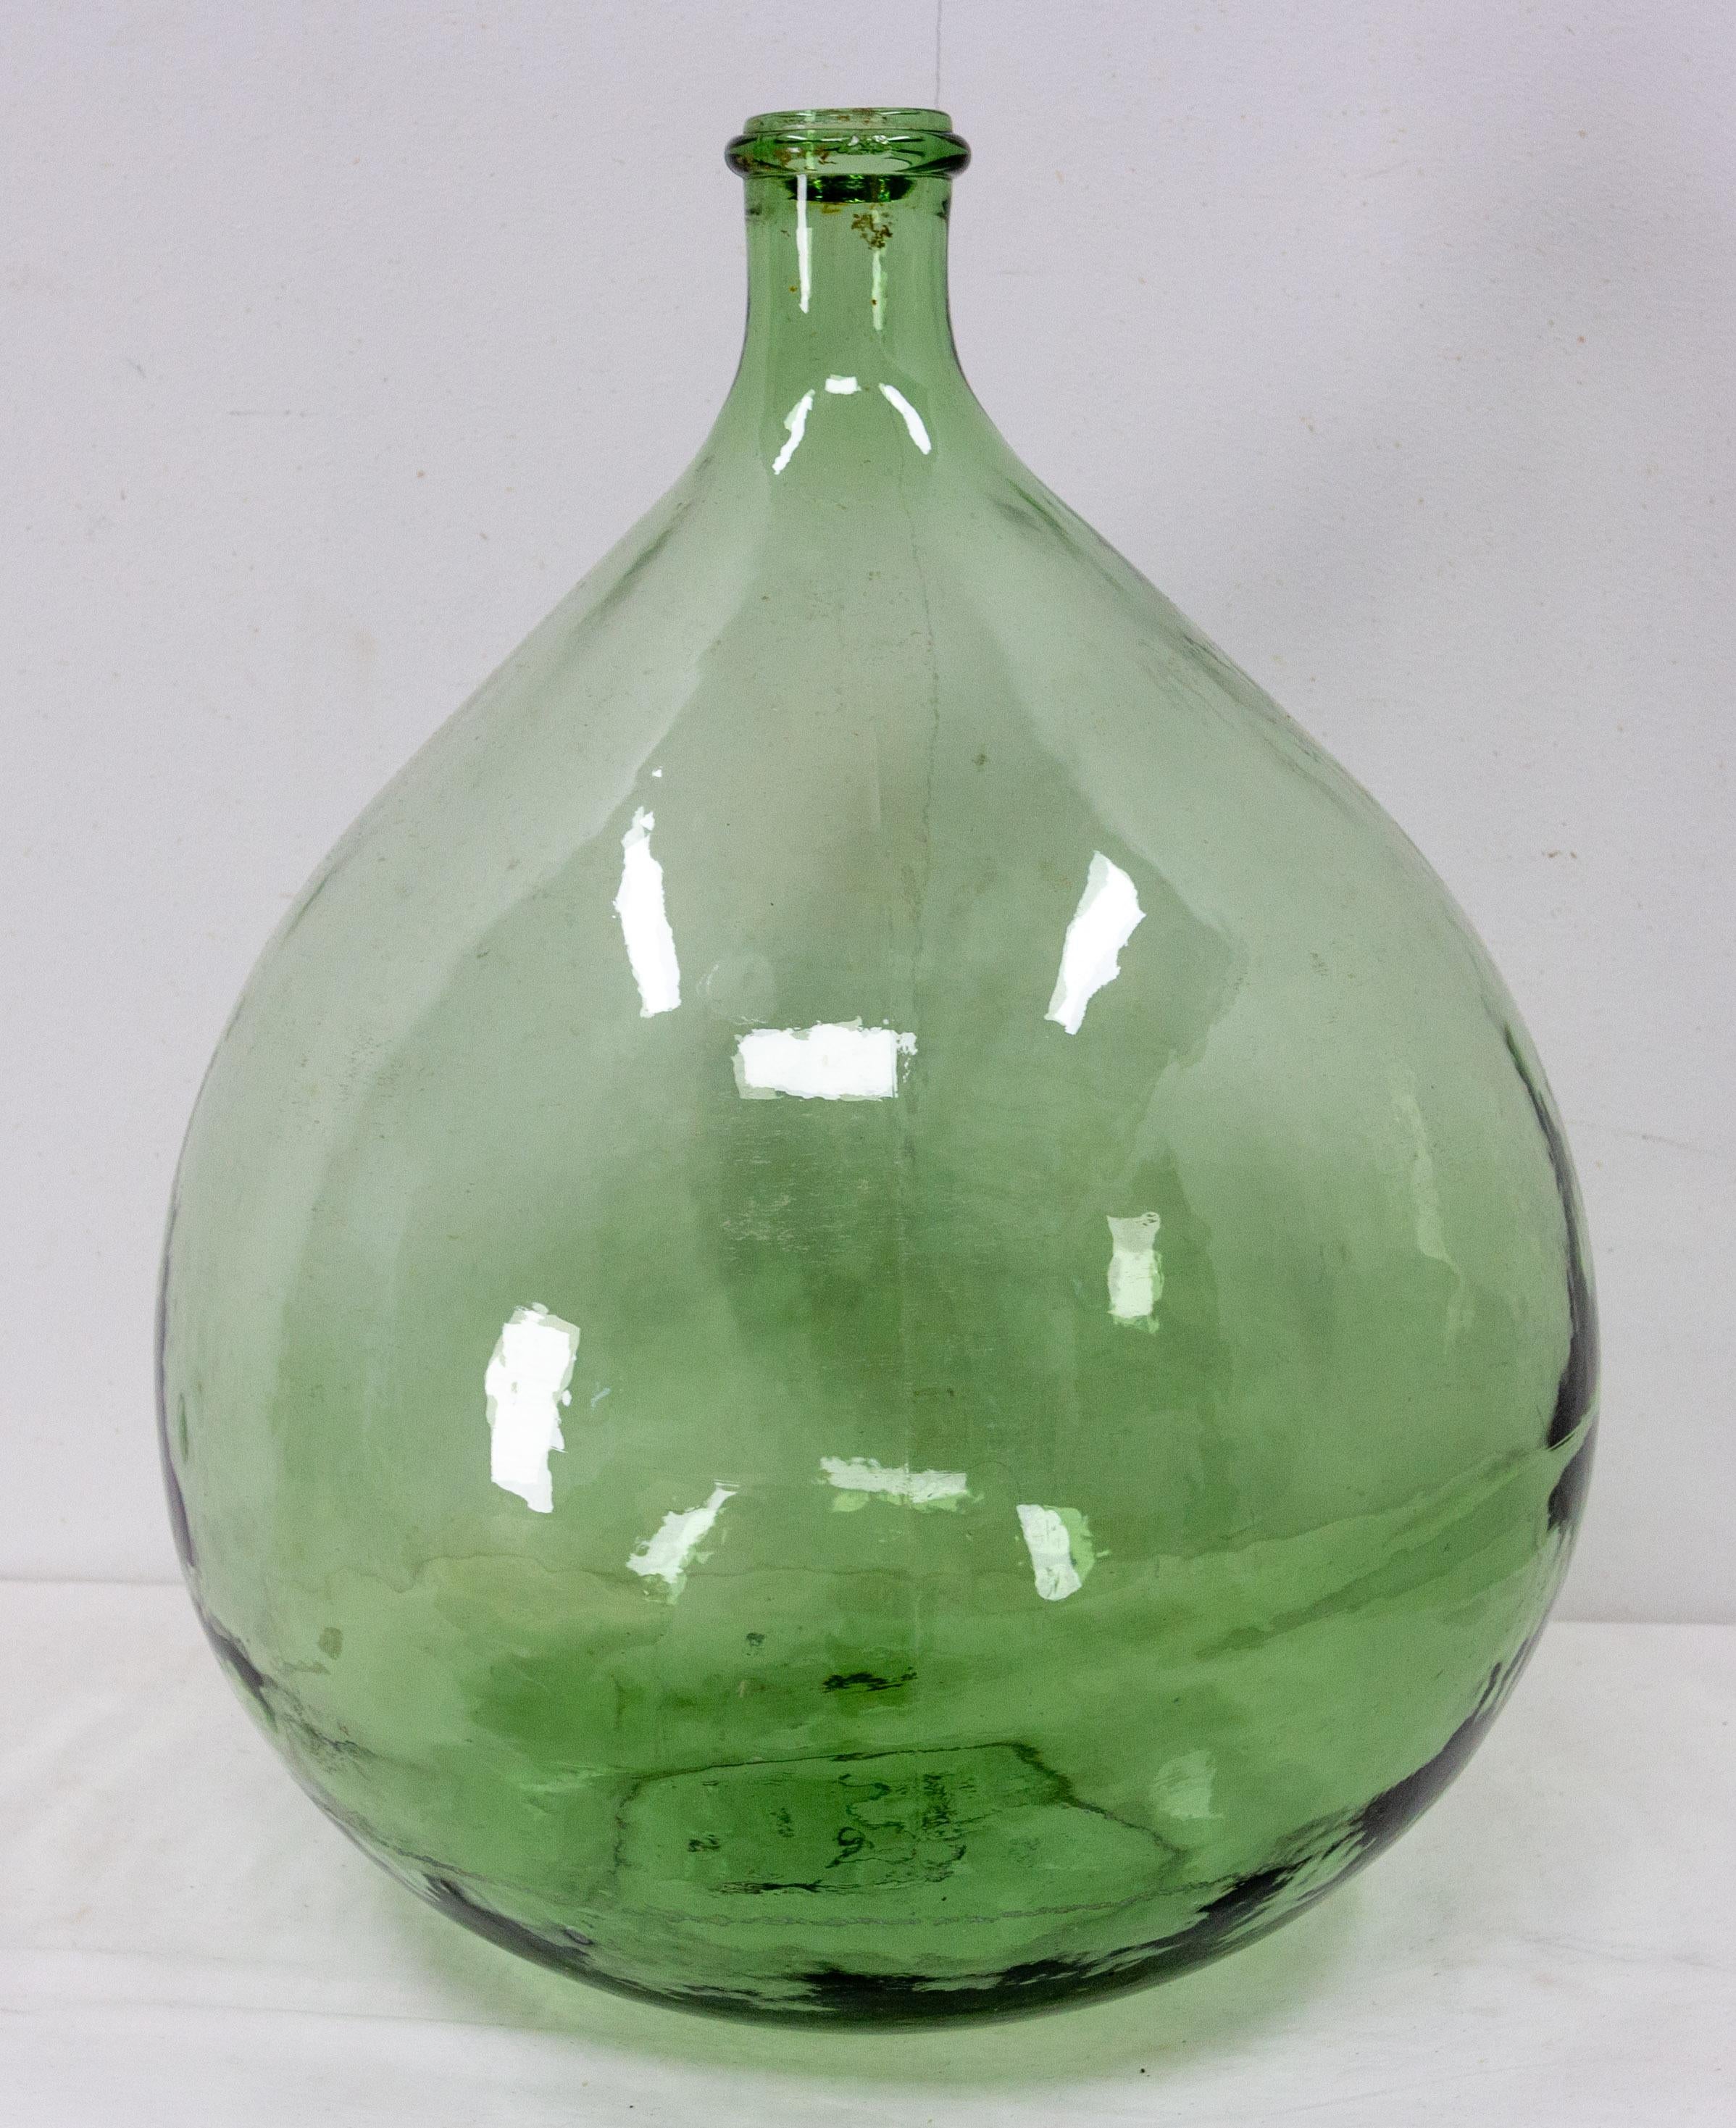 Dame Jeanne or carboy vintage glass bottle demijohn
Barcelona Model,
Irregularities in the glass and marks of use that give it all its charm.
Green color.
6.87 US gallon or 26L
Very good condition.